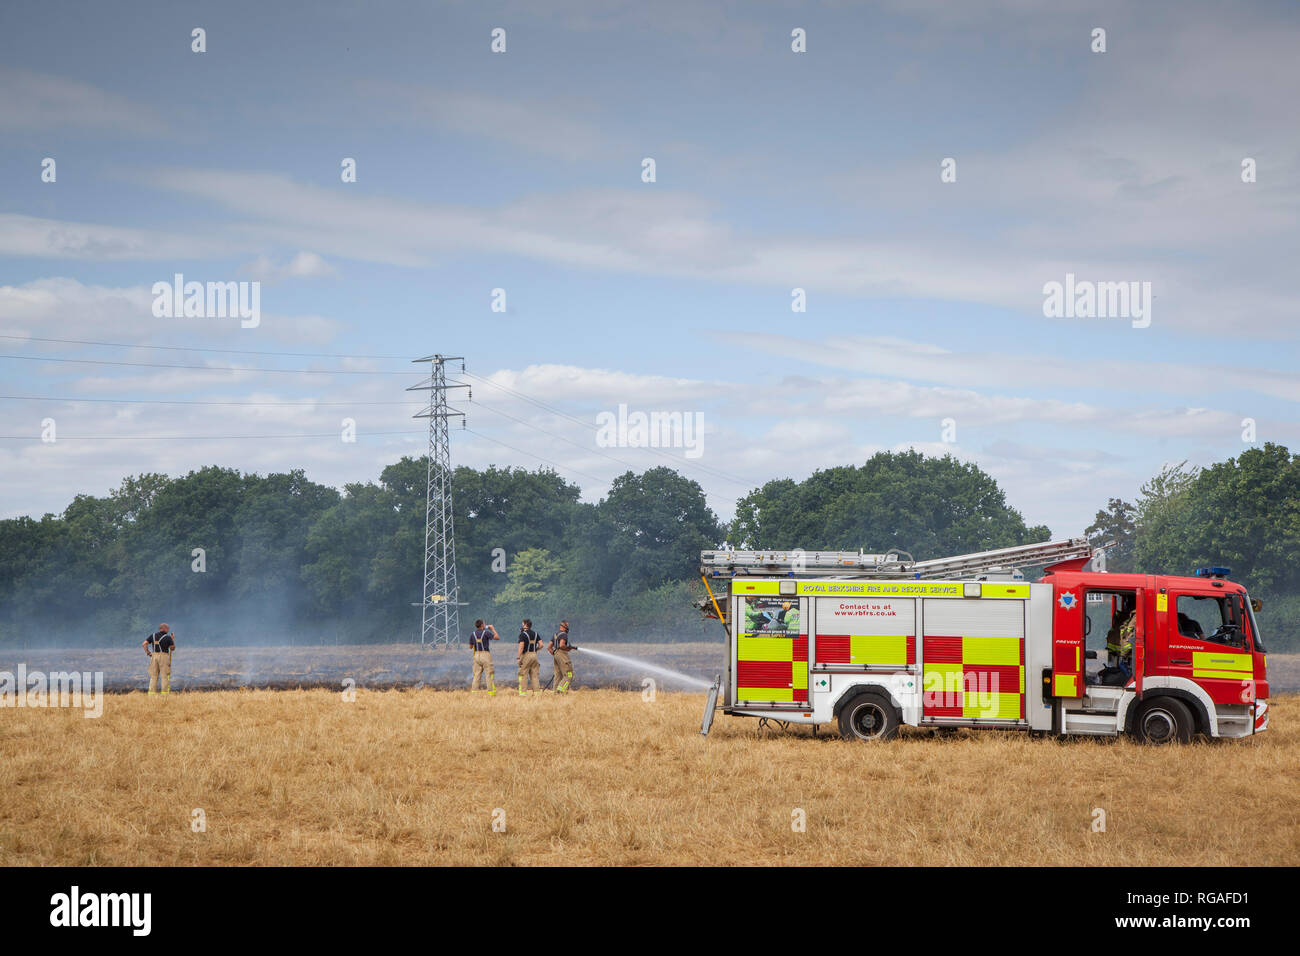 Firemen and appliances from Royal Berkshire Fire and Rescue Service attend a stubble fire near Kidmore End, Oxfordshire Stock Photo